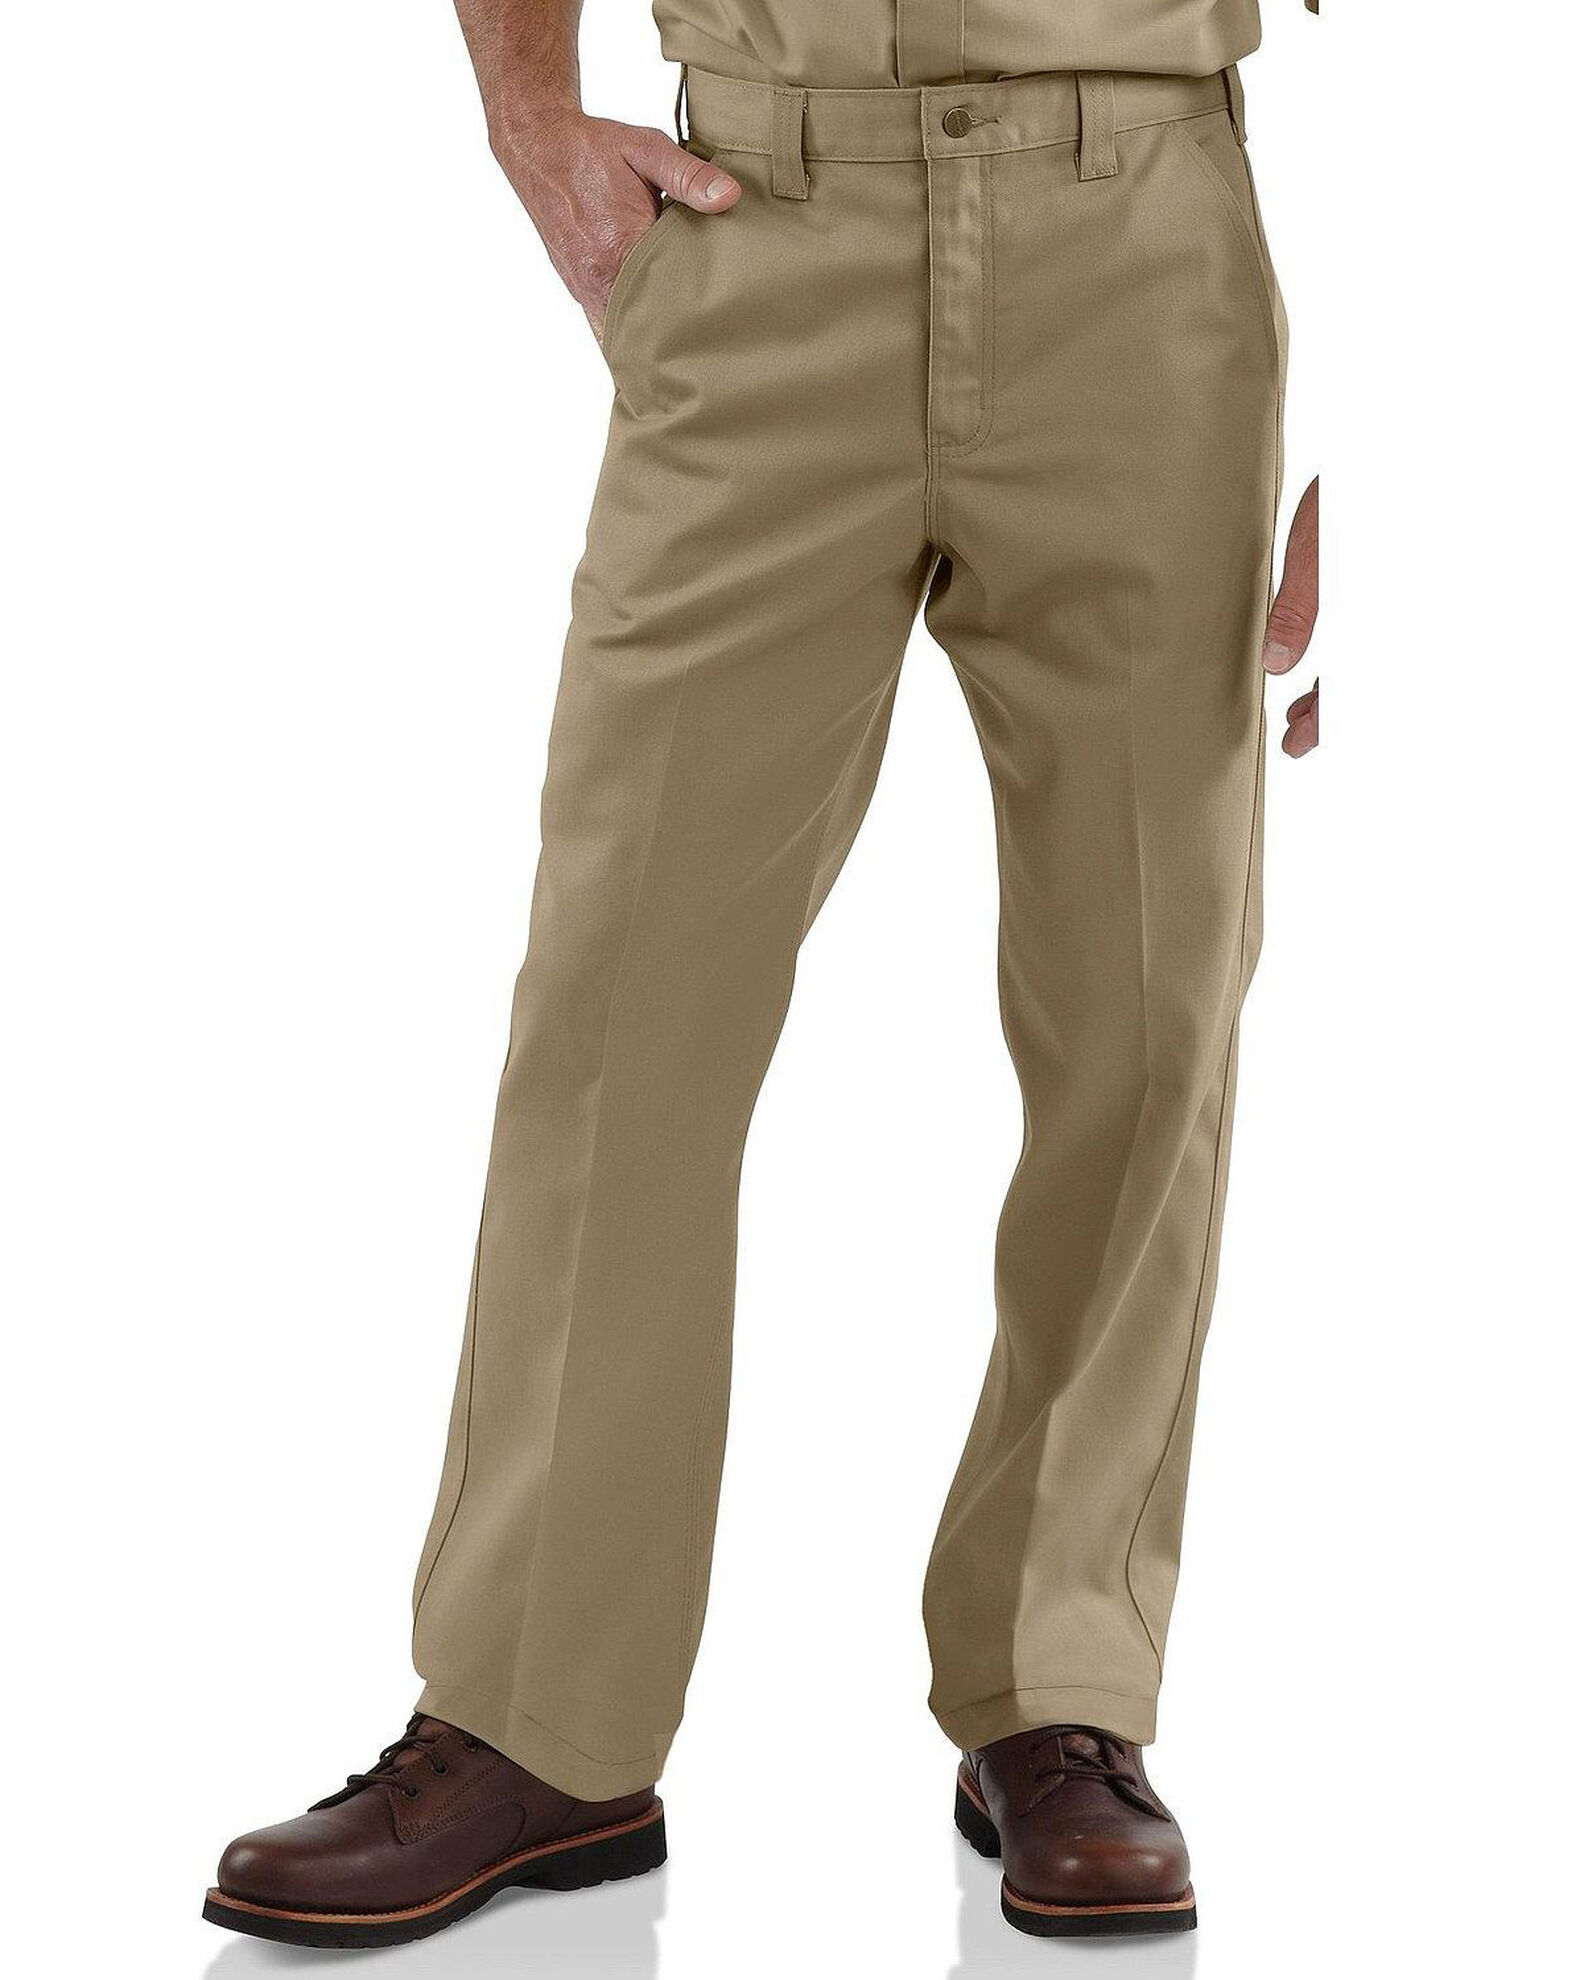 Product Name: Carhartt Men's Blended Twill Chino Work Pants - Big & Tall